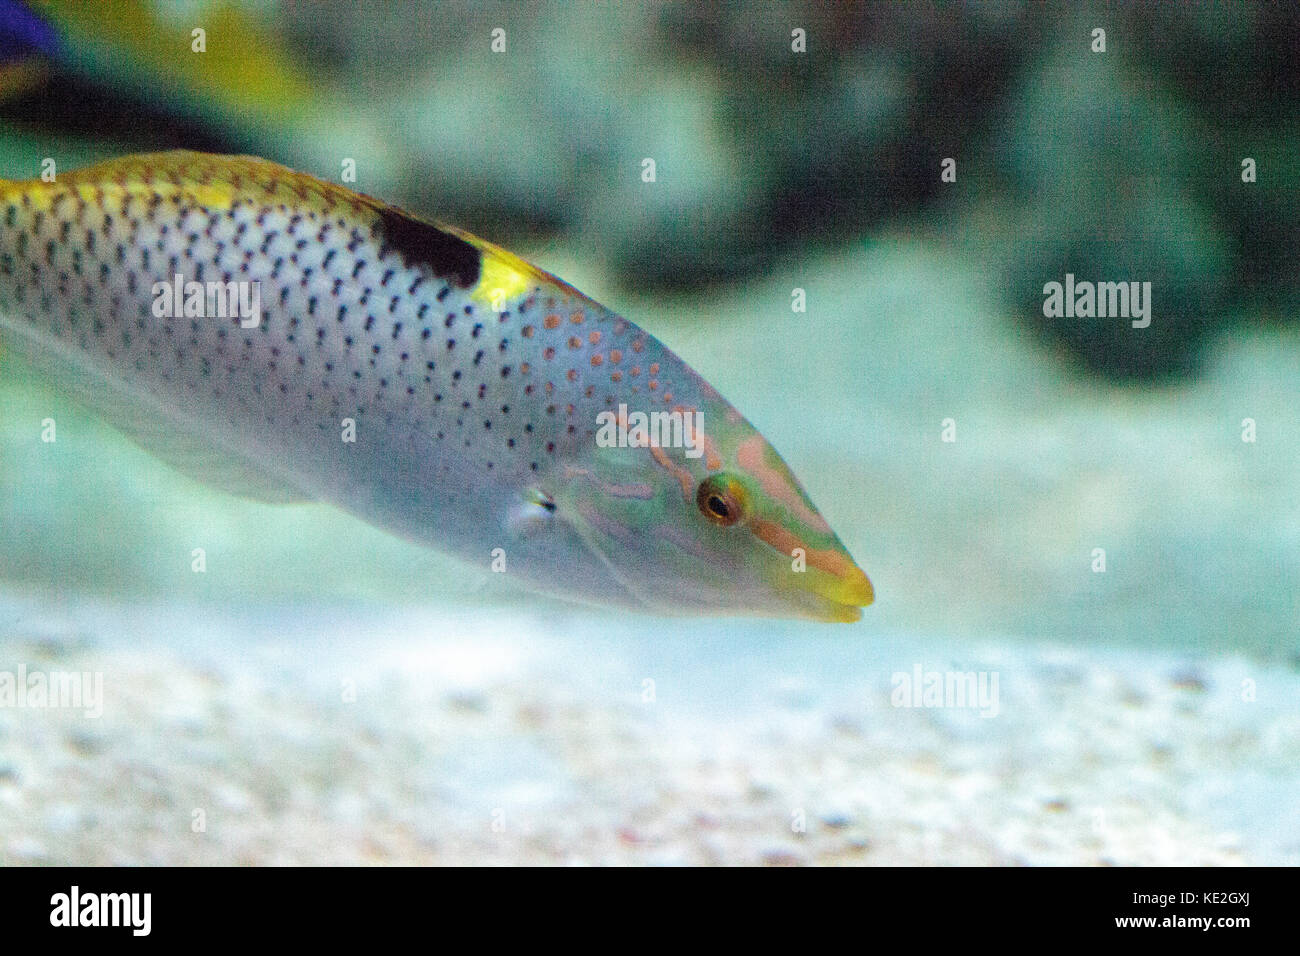 Checkered wrasse Halichoeres hortulanus swims above a coral reef in a marine aquarium Stock Photo